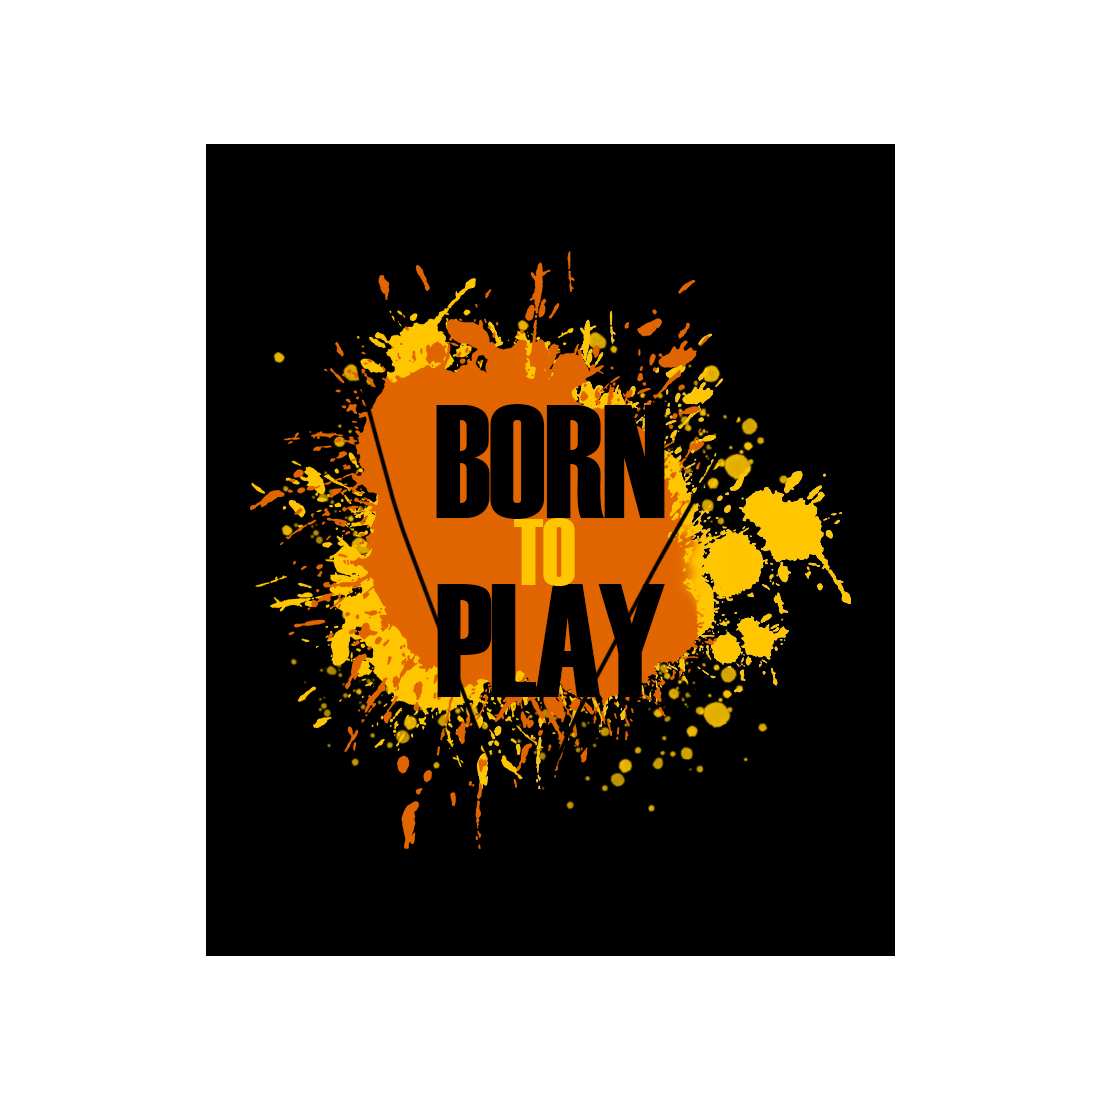 Born to play quotes t-shirt graphic print preview image.